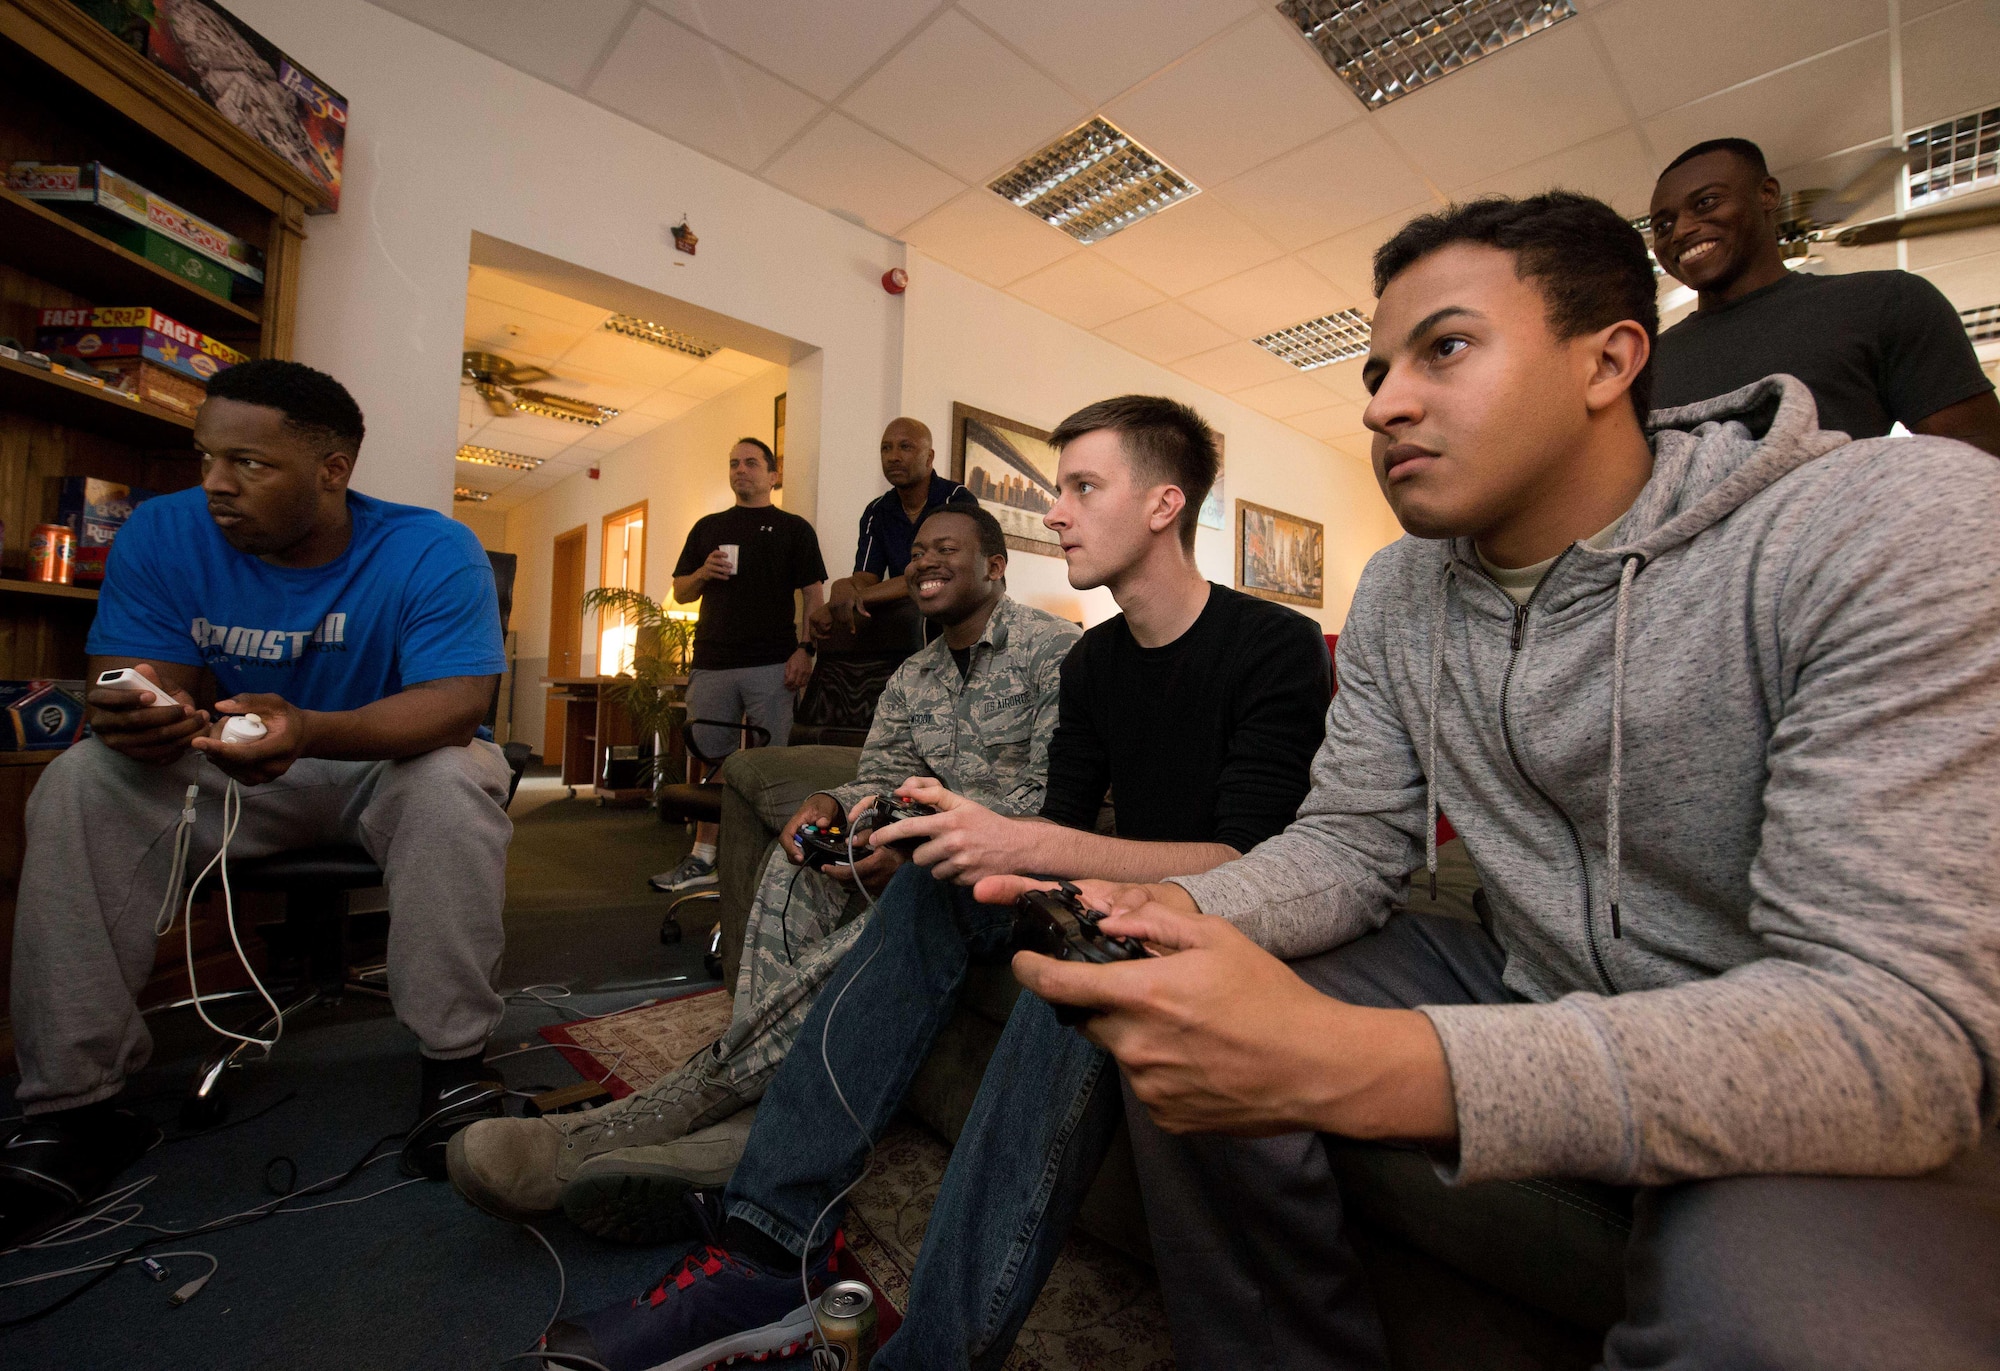 Airmen play in the game room at Club 7 on Ramstein Air Base, June 10, 2017. The 86th Airlift Wing Chapel’s Airmen Ministry Center runs Club 7 locations on Ramstein and Kapaun Air Station with the goal of providing junior enlisted Airmen a safe “home away from home” atmosphere where they can relax and make friends. (U.S. Air Force photo by Senior Airman Elizabeth Baker)